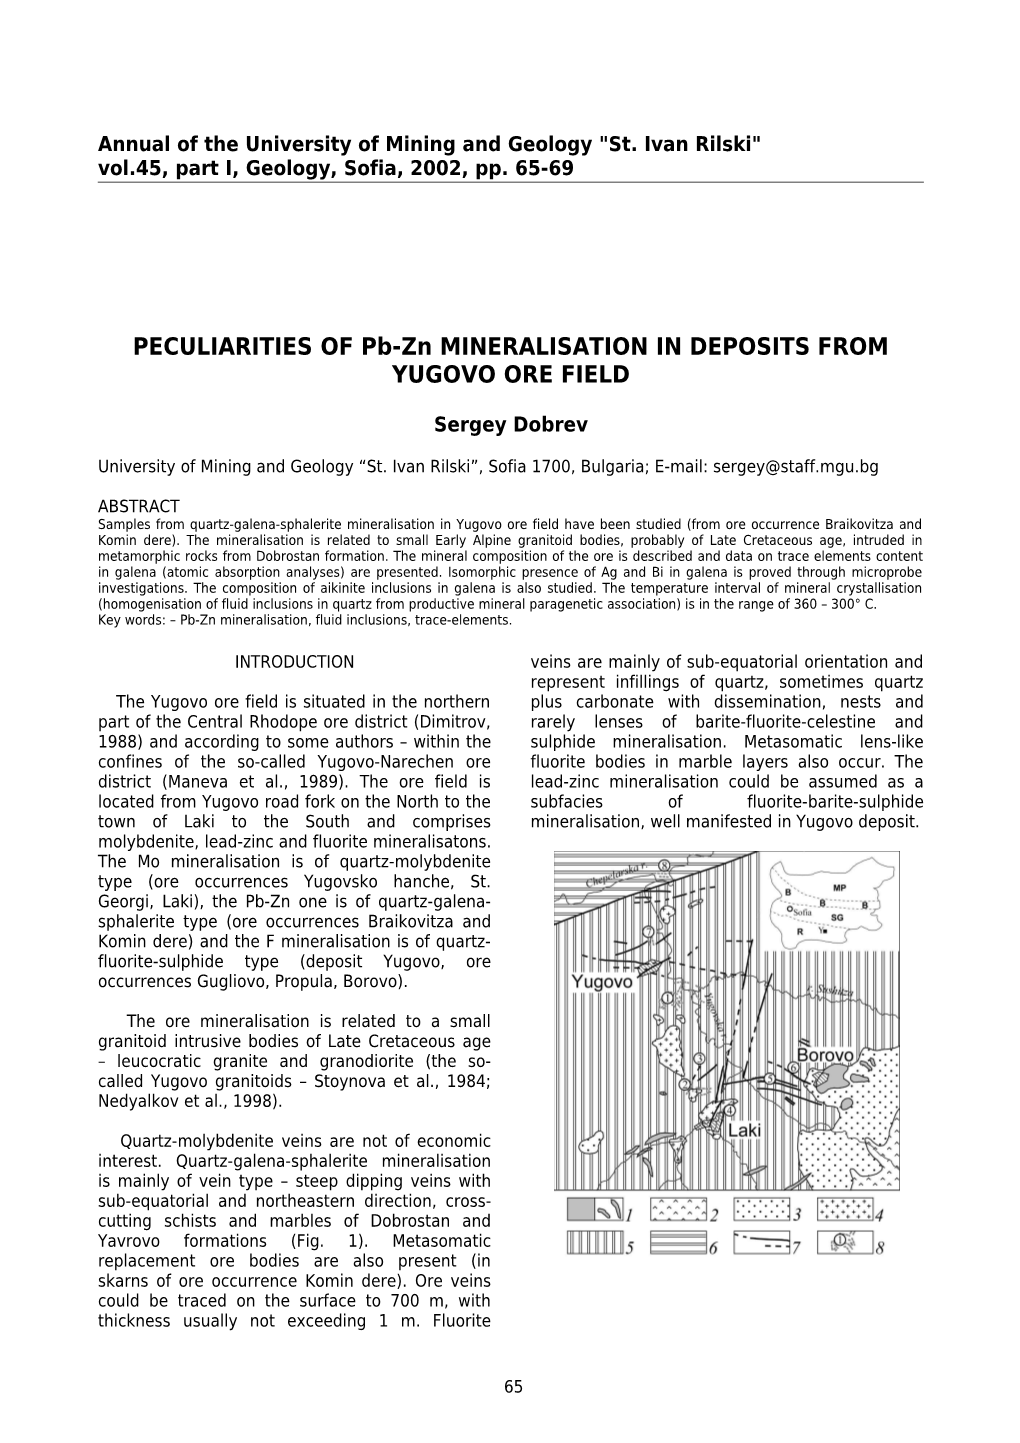 PECULIARITIES of Pb-Zn MINERALISATION in DEPOSITS from YUGOVO ORE FIELD